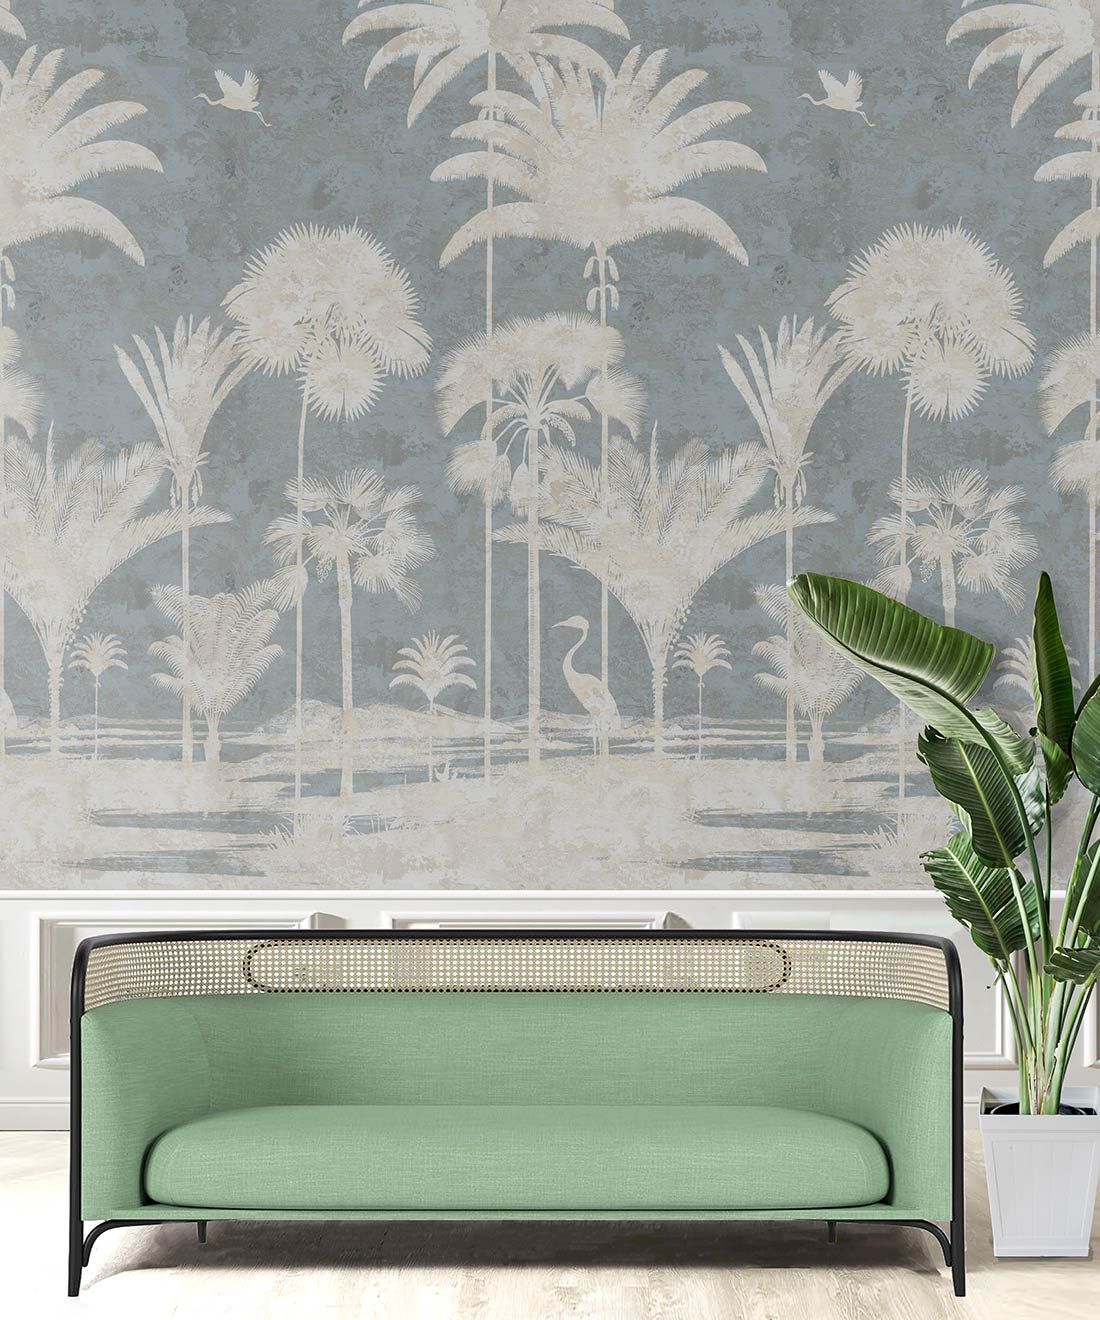 Shadow Palms Wallpaper Mural •Bethany Linz • Palm Tree Mural • Blue • Insitu with mint green sofa